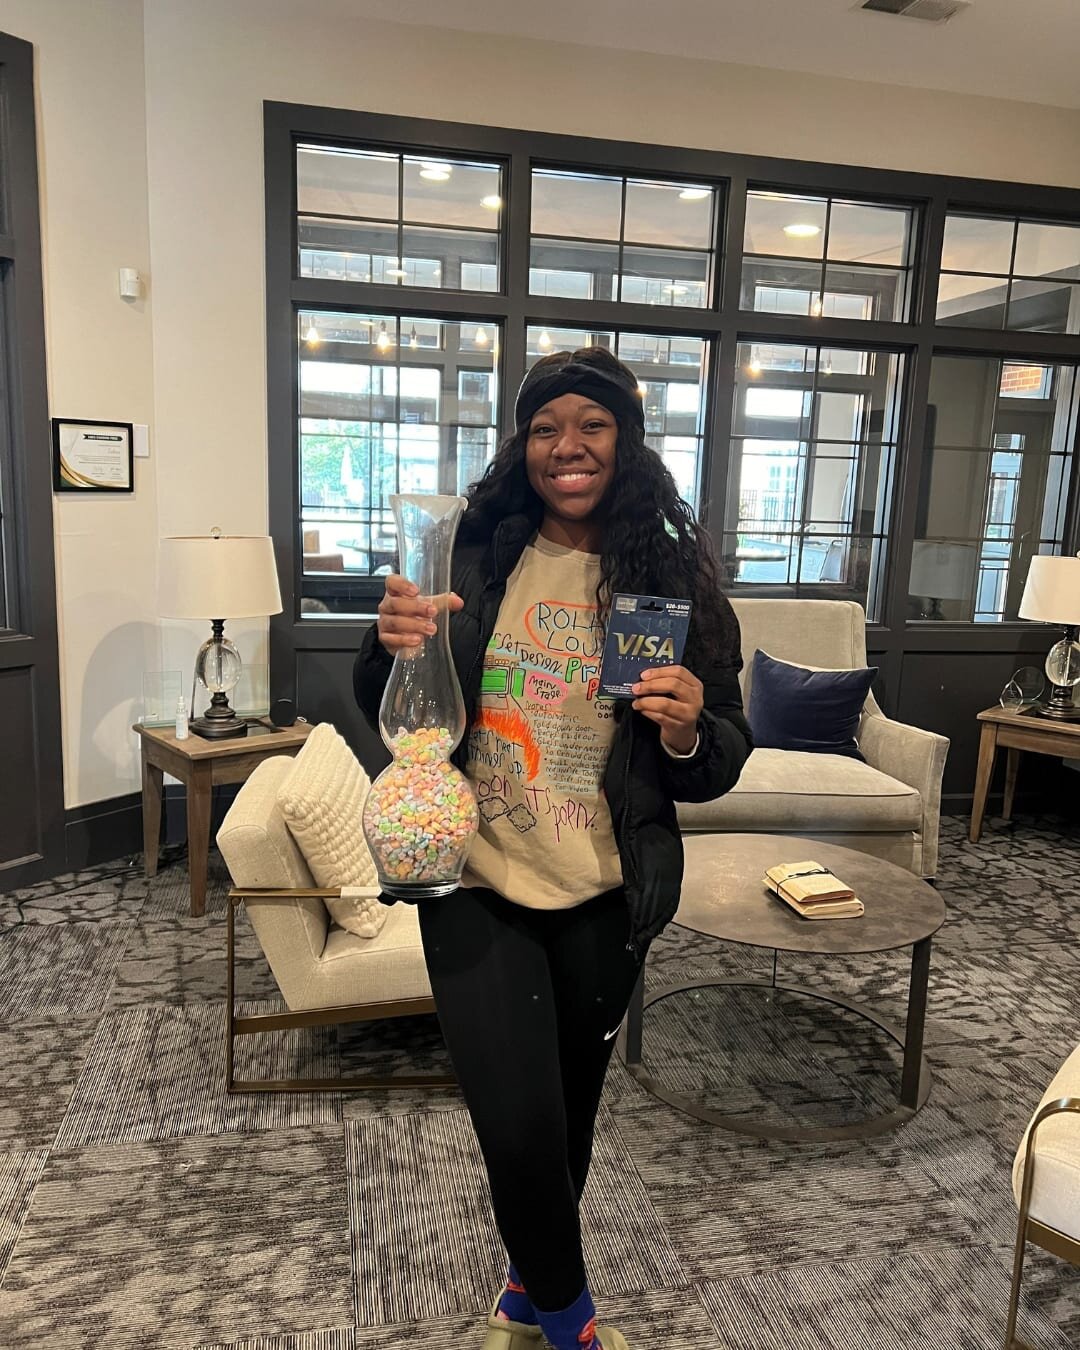 Drum roll please .....Congratulations to our lucky winner! She guessed 1,501, only 34 charms off of the total count of 1,535! Thank you to everyone who participated! 🍀🌈

What events and win its would you like to see in the future? Comment below!